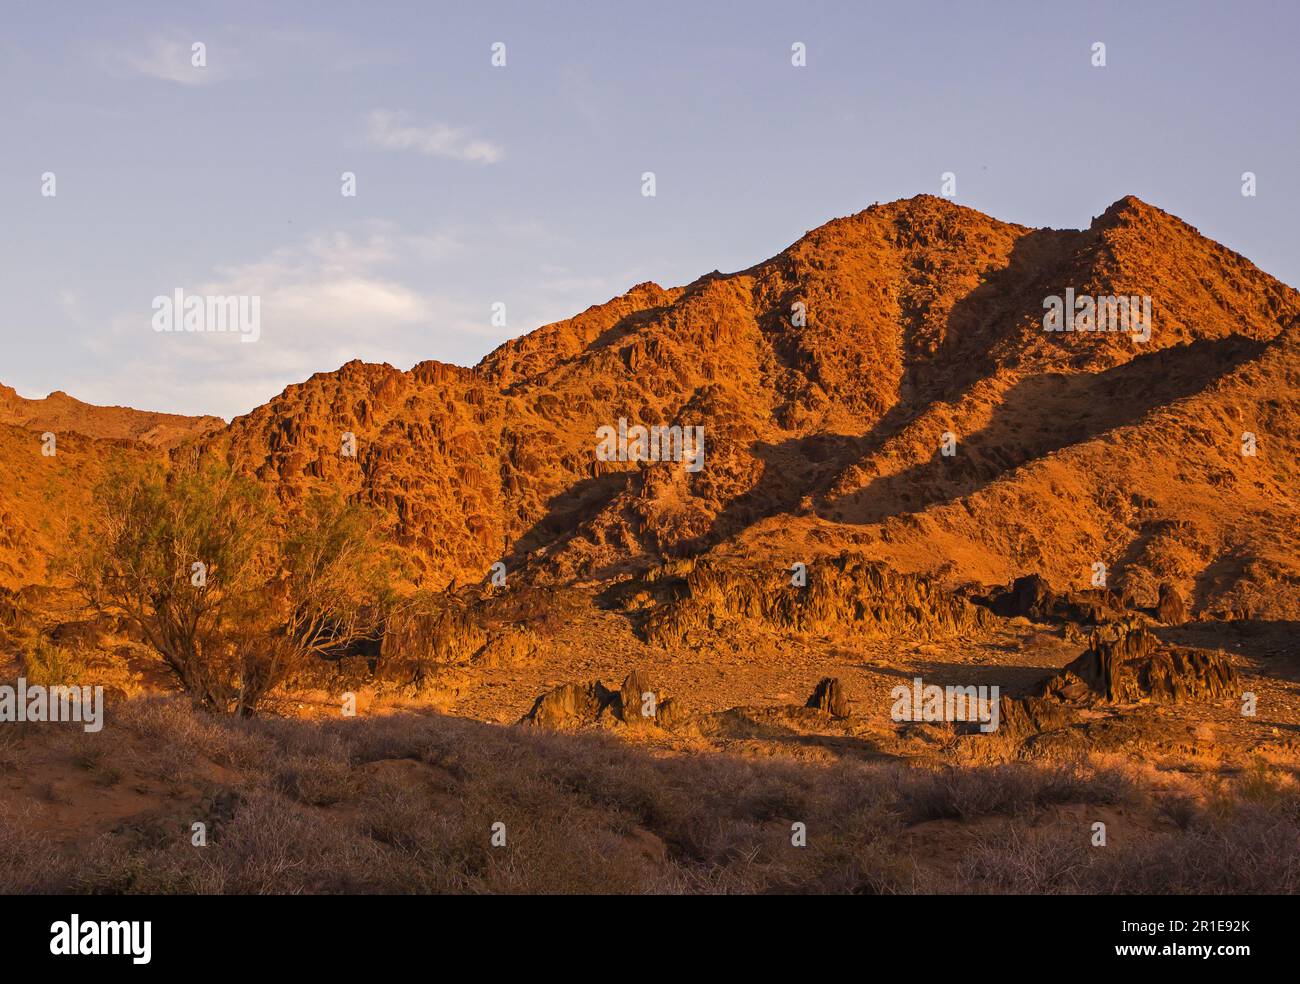 The dark rocky mountains of the Richtersveld of South Africa, in the golden late afternoon light Stock Photo